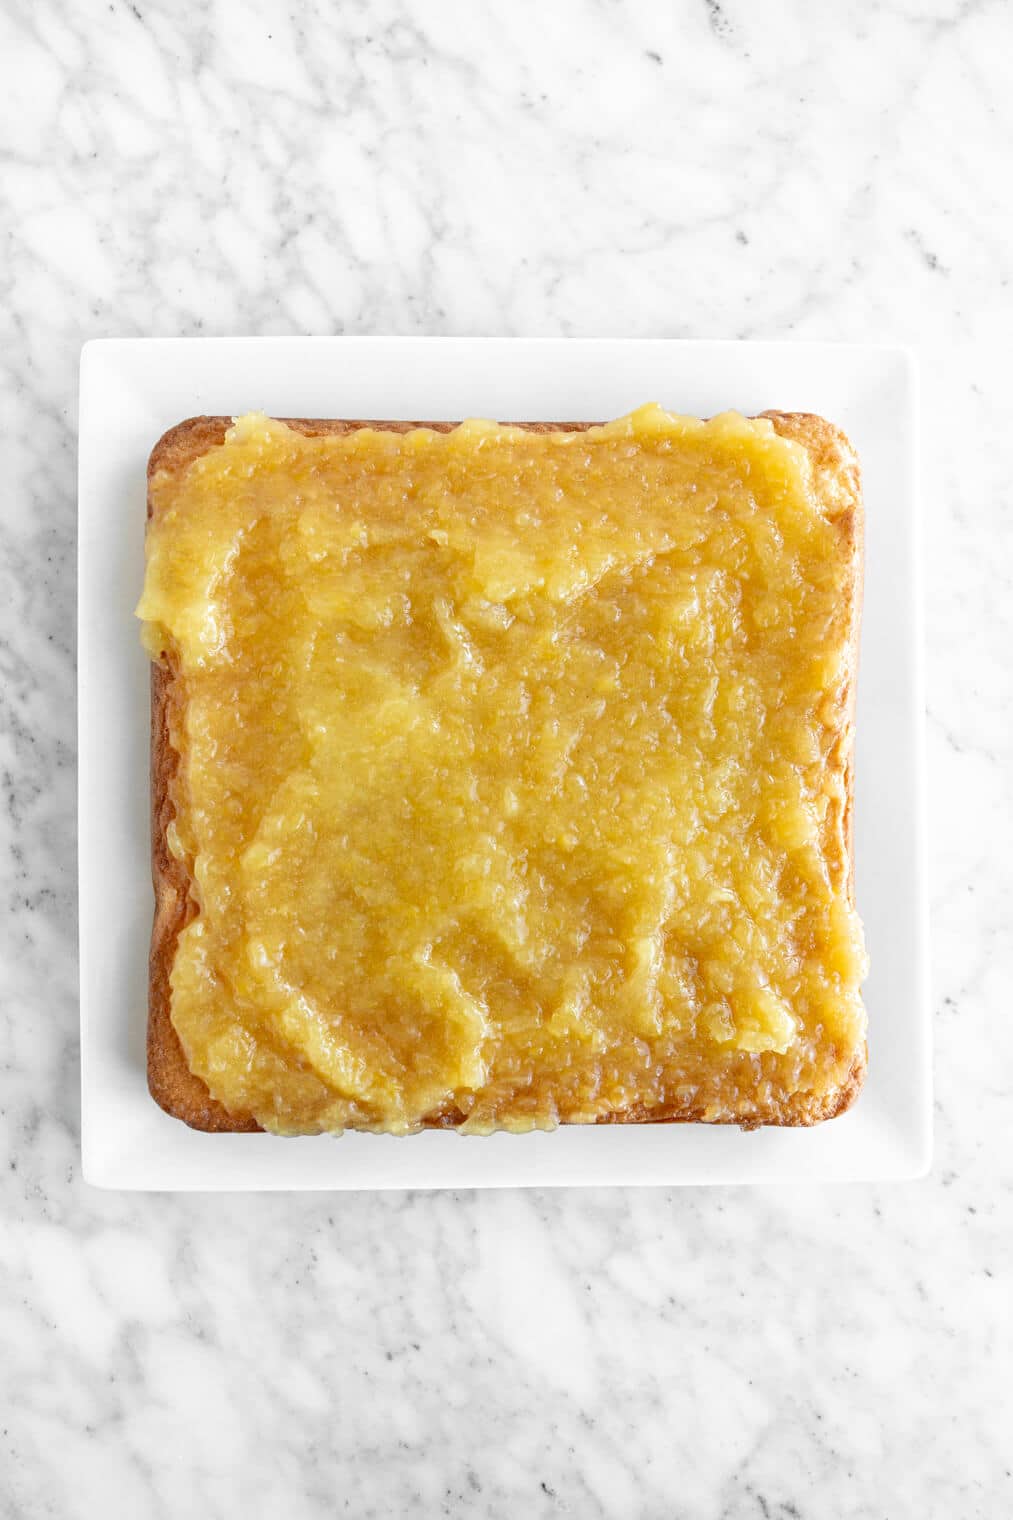 Square cake topped with pineapple filling on a white serving plate.